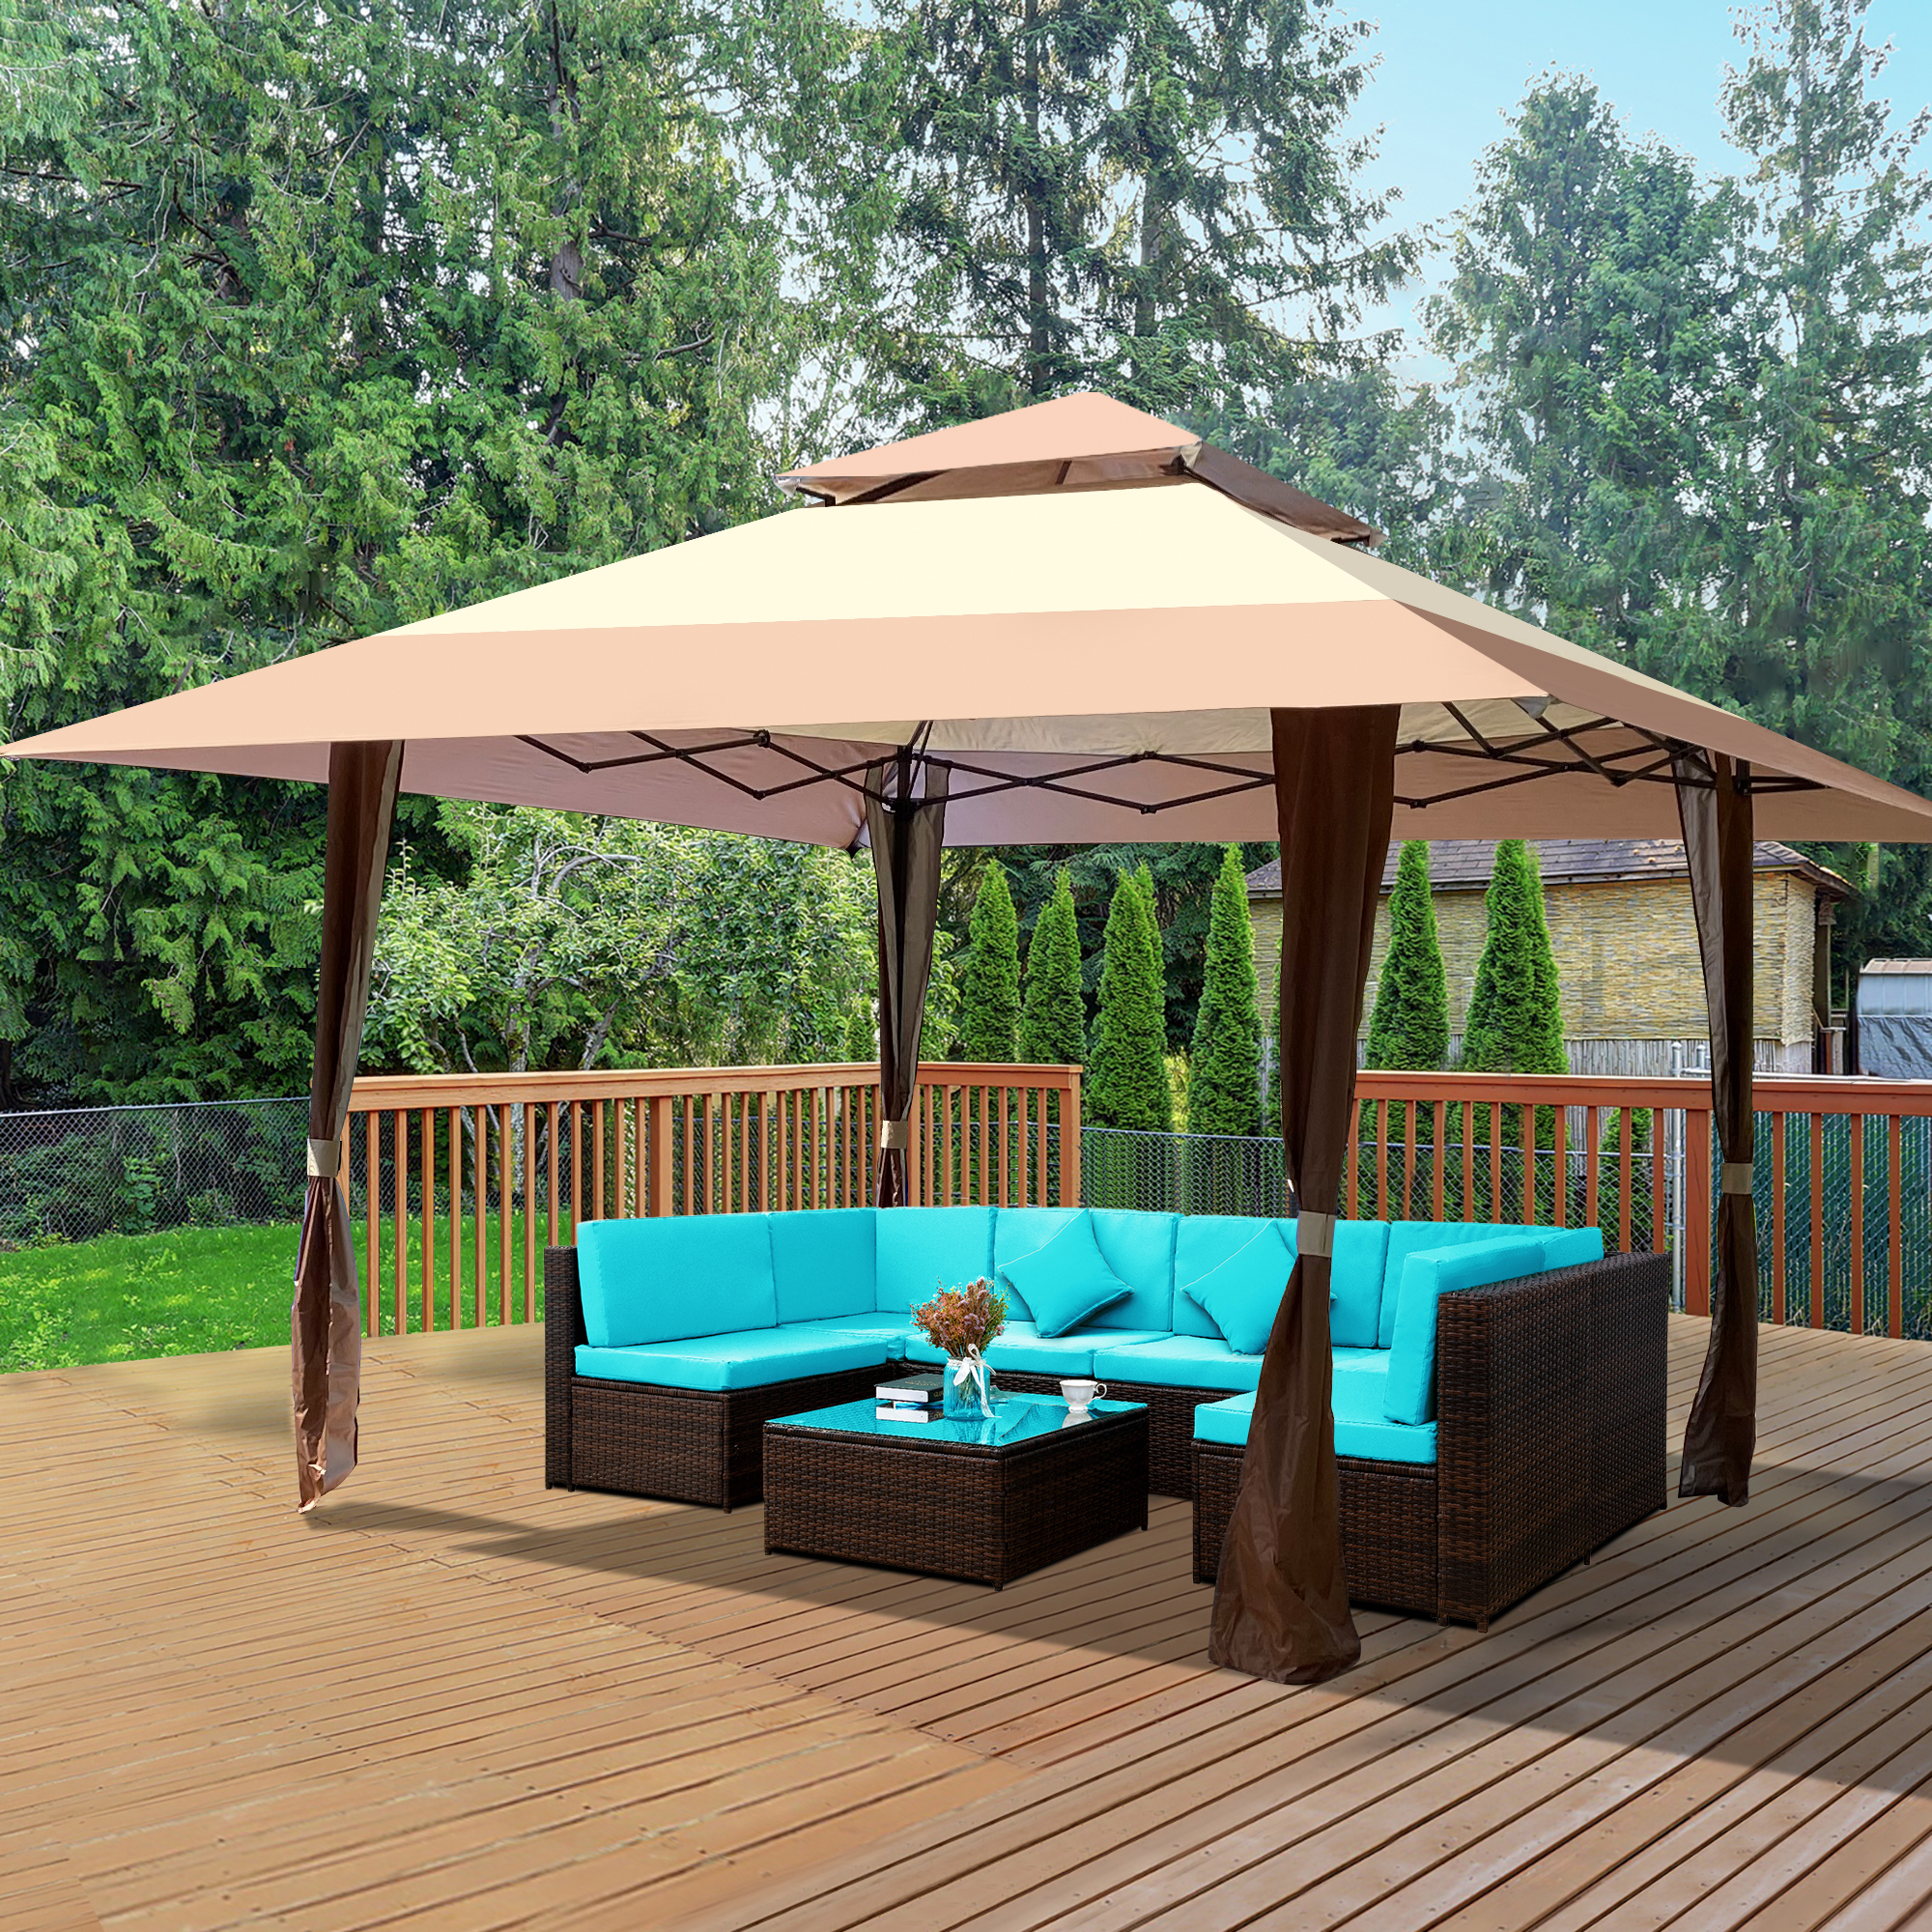 Outdoor 13x13 Ft Canopy,Patio Pop-up Gazebo Canopy Tent With Corner Curtain,Suitable For Backyard, Party,Camping,Coffee-Boyel Living